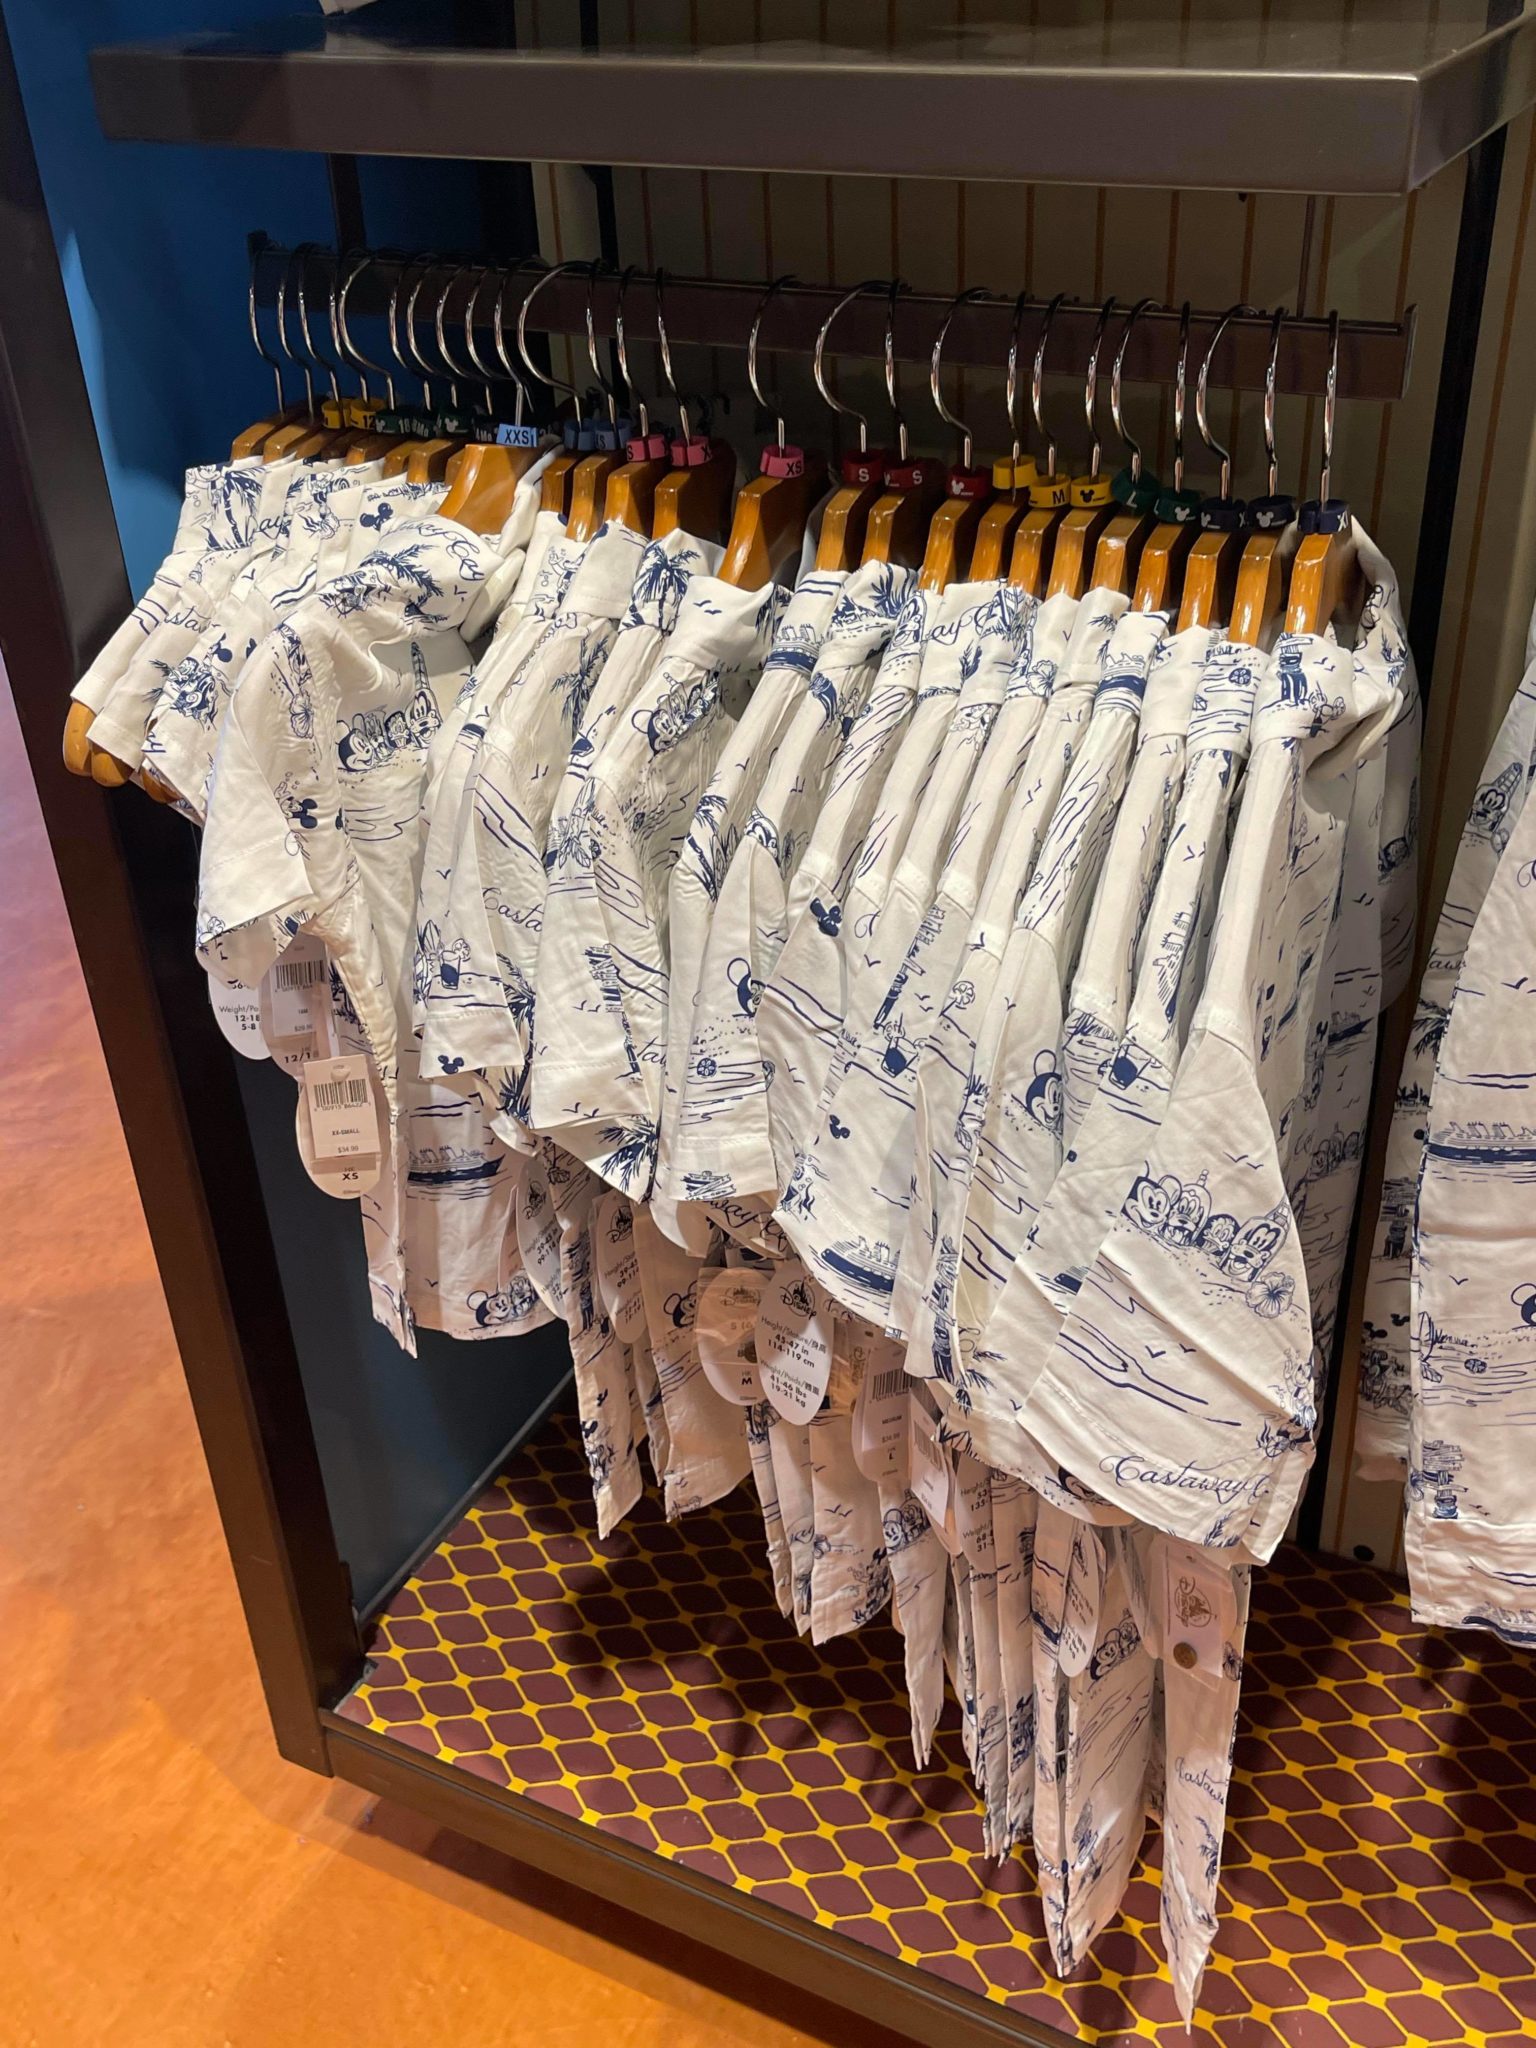 Disney Cruise Line Apparel NOW Available at Marketplace Co-Op ...